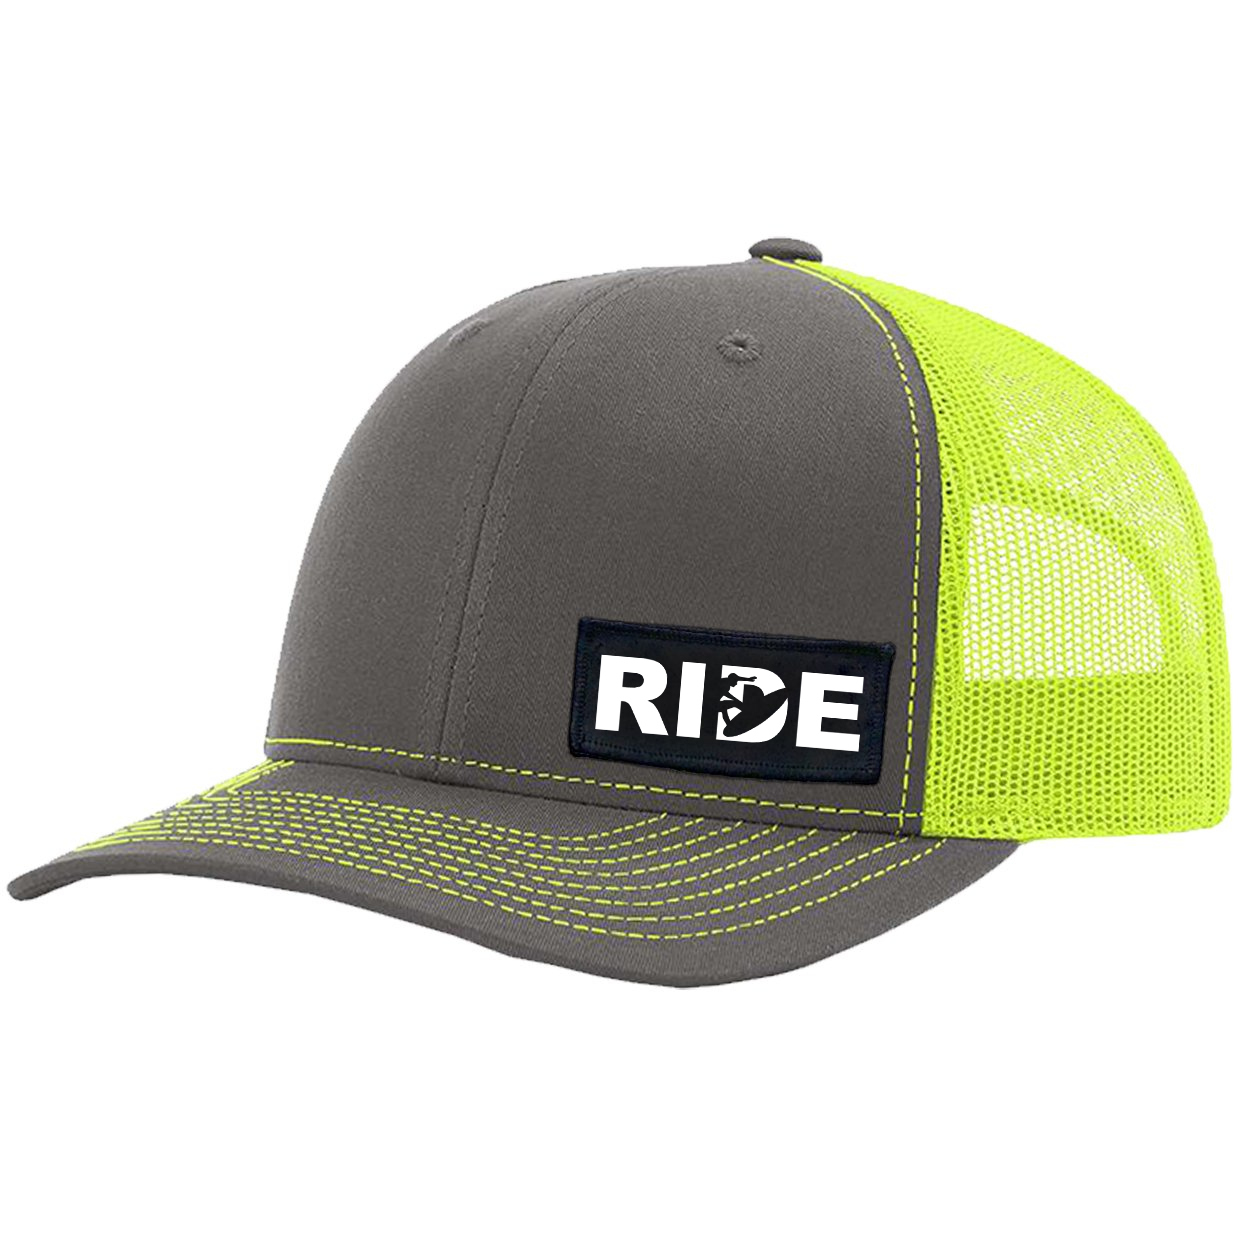 Ride Surf Logo Night Out Woven Patch Snapback Trucker Hat Charcoal/Neon Yellow (White Logo)